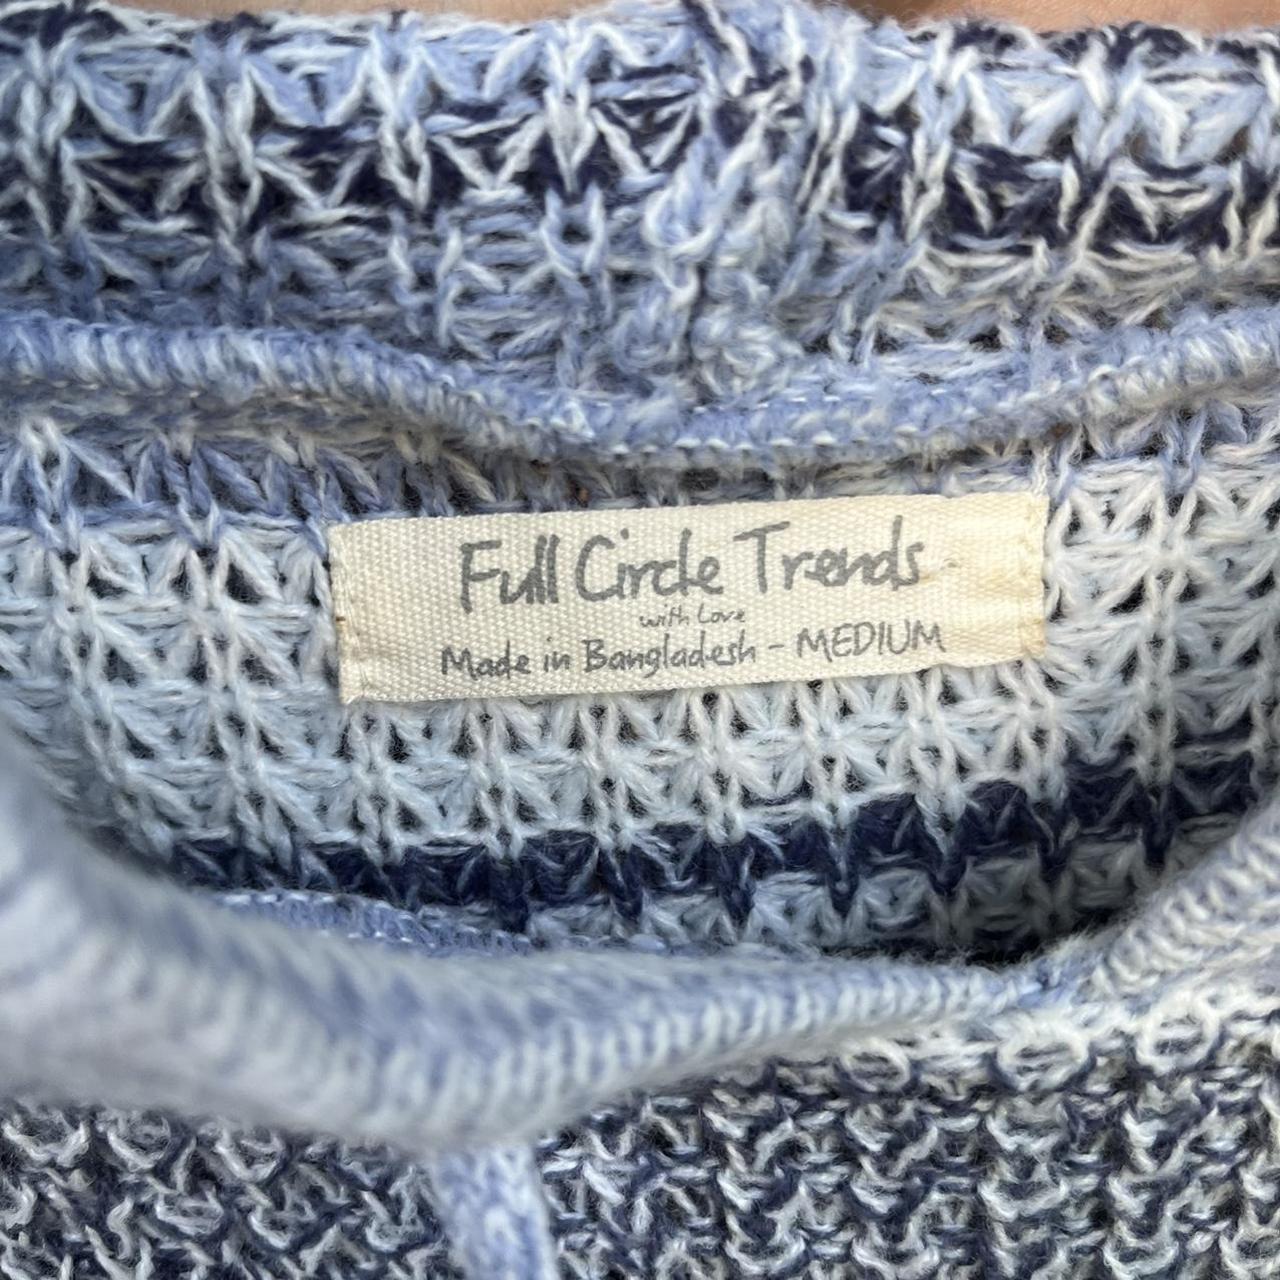 Full Circle Trends Women's White and Blue Jumper (4)